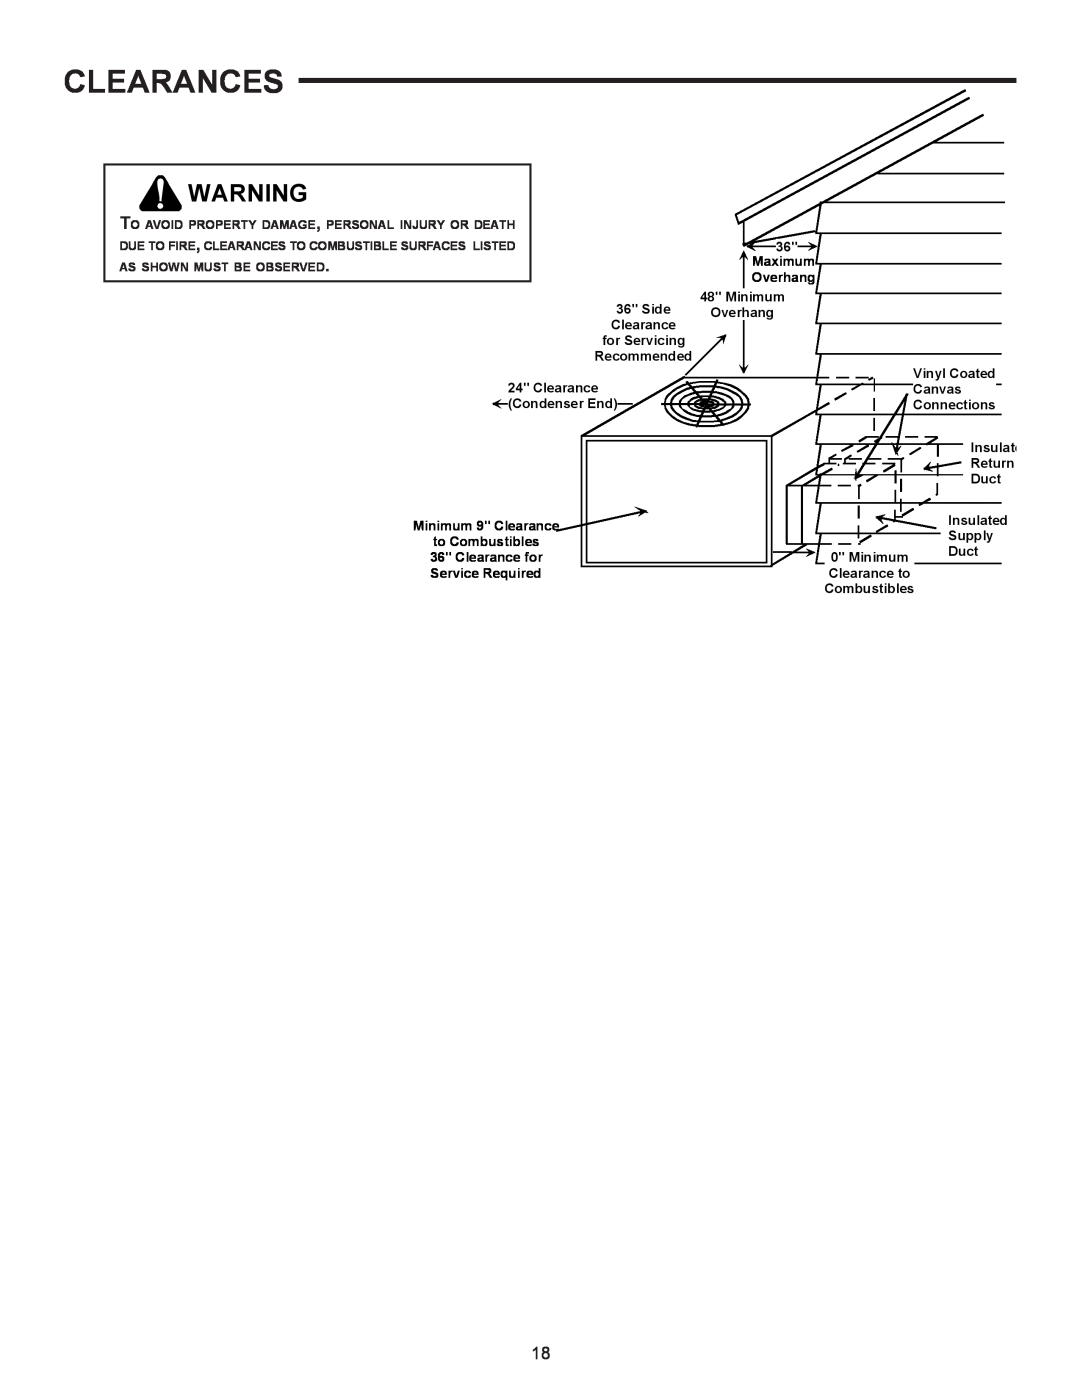 Amana PACKAGE HEAT PUMP installation instructions Clearances 